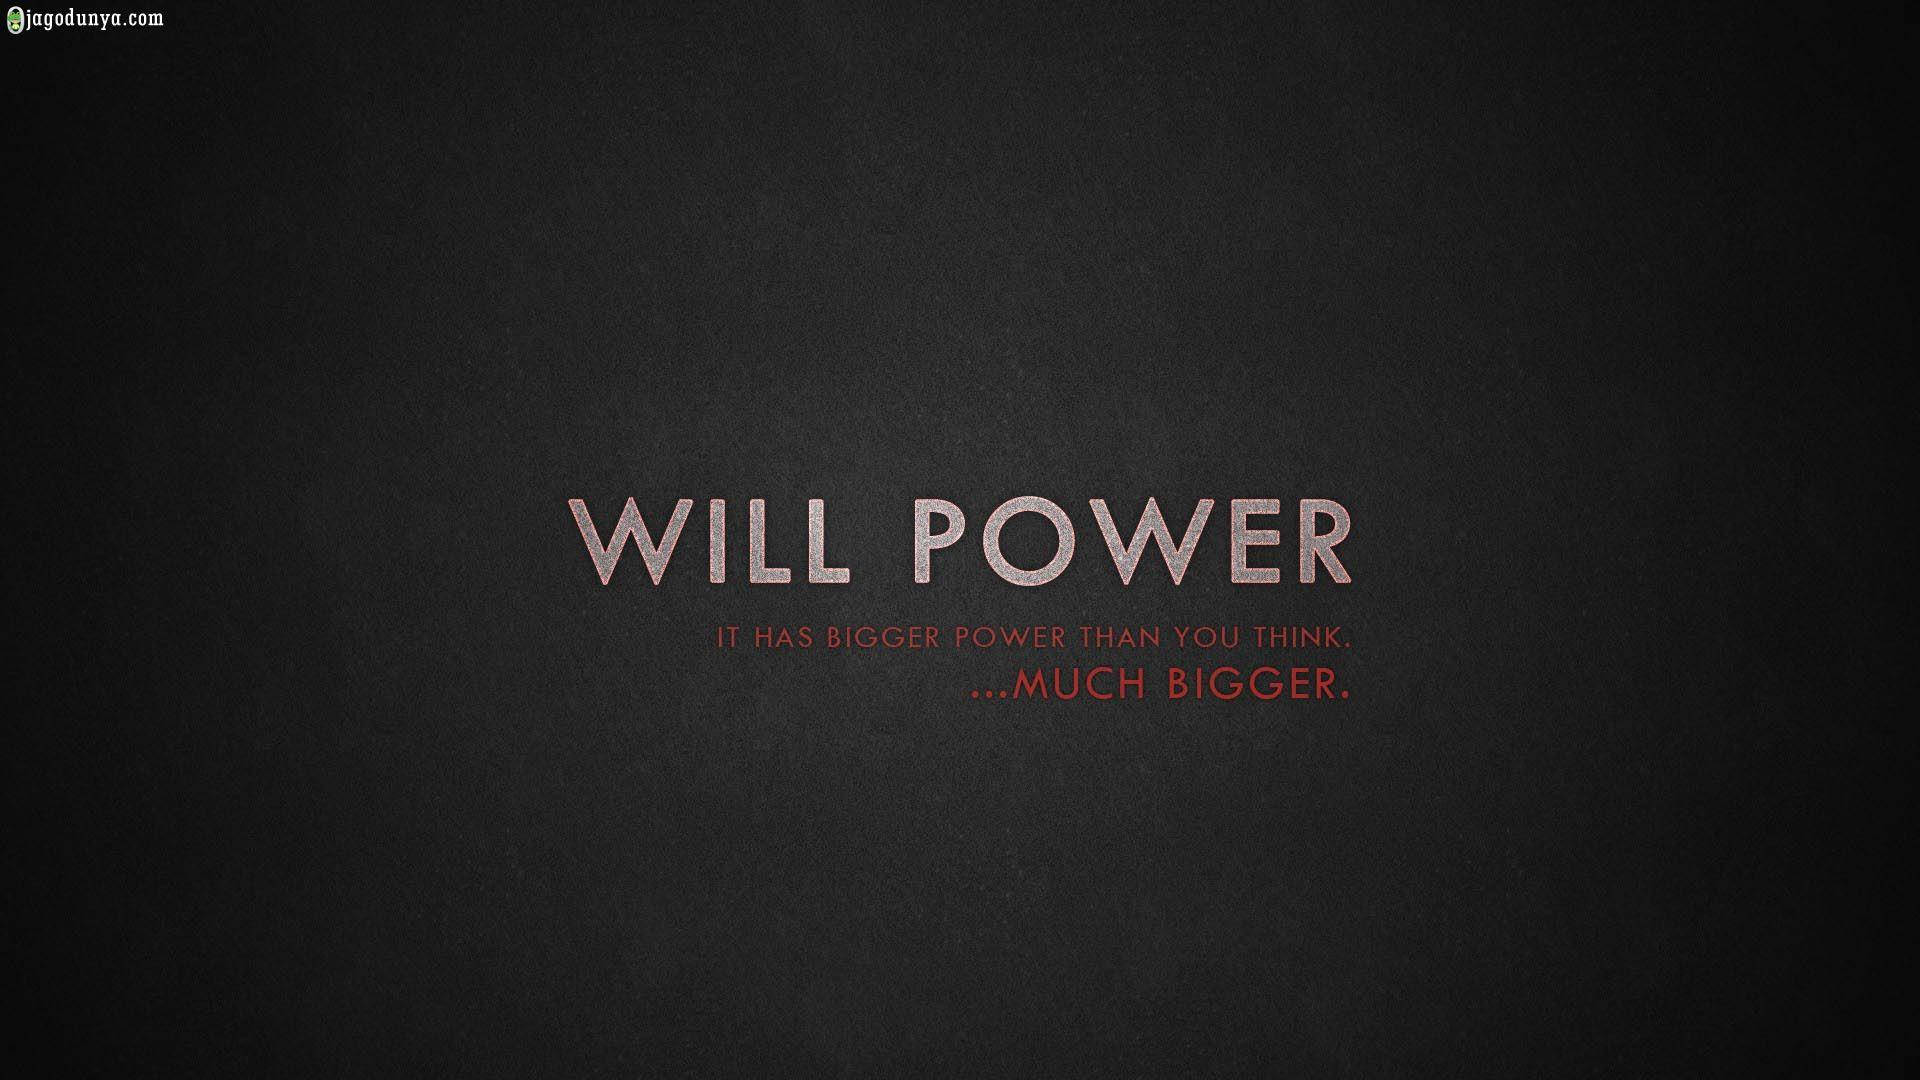 Will Power Motivational Hd Quotation Background